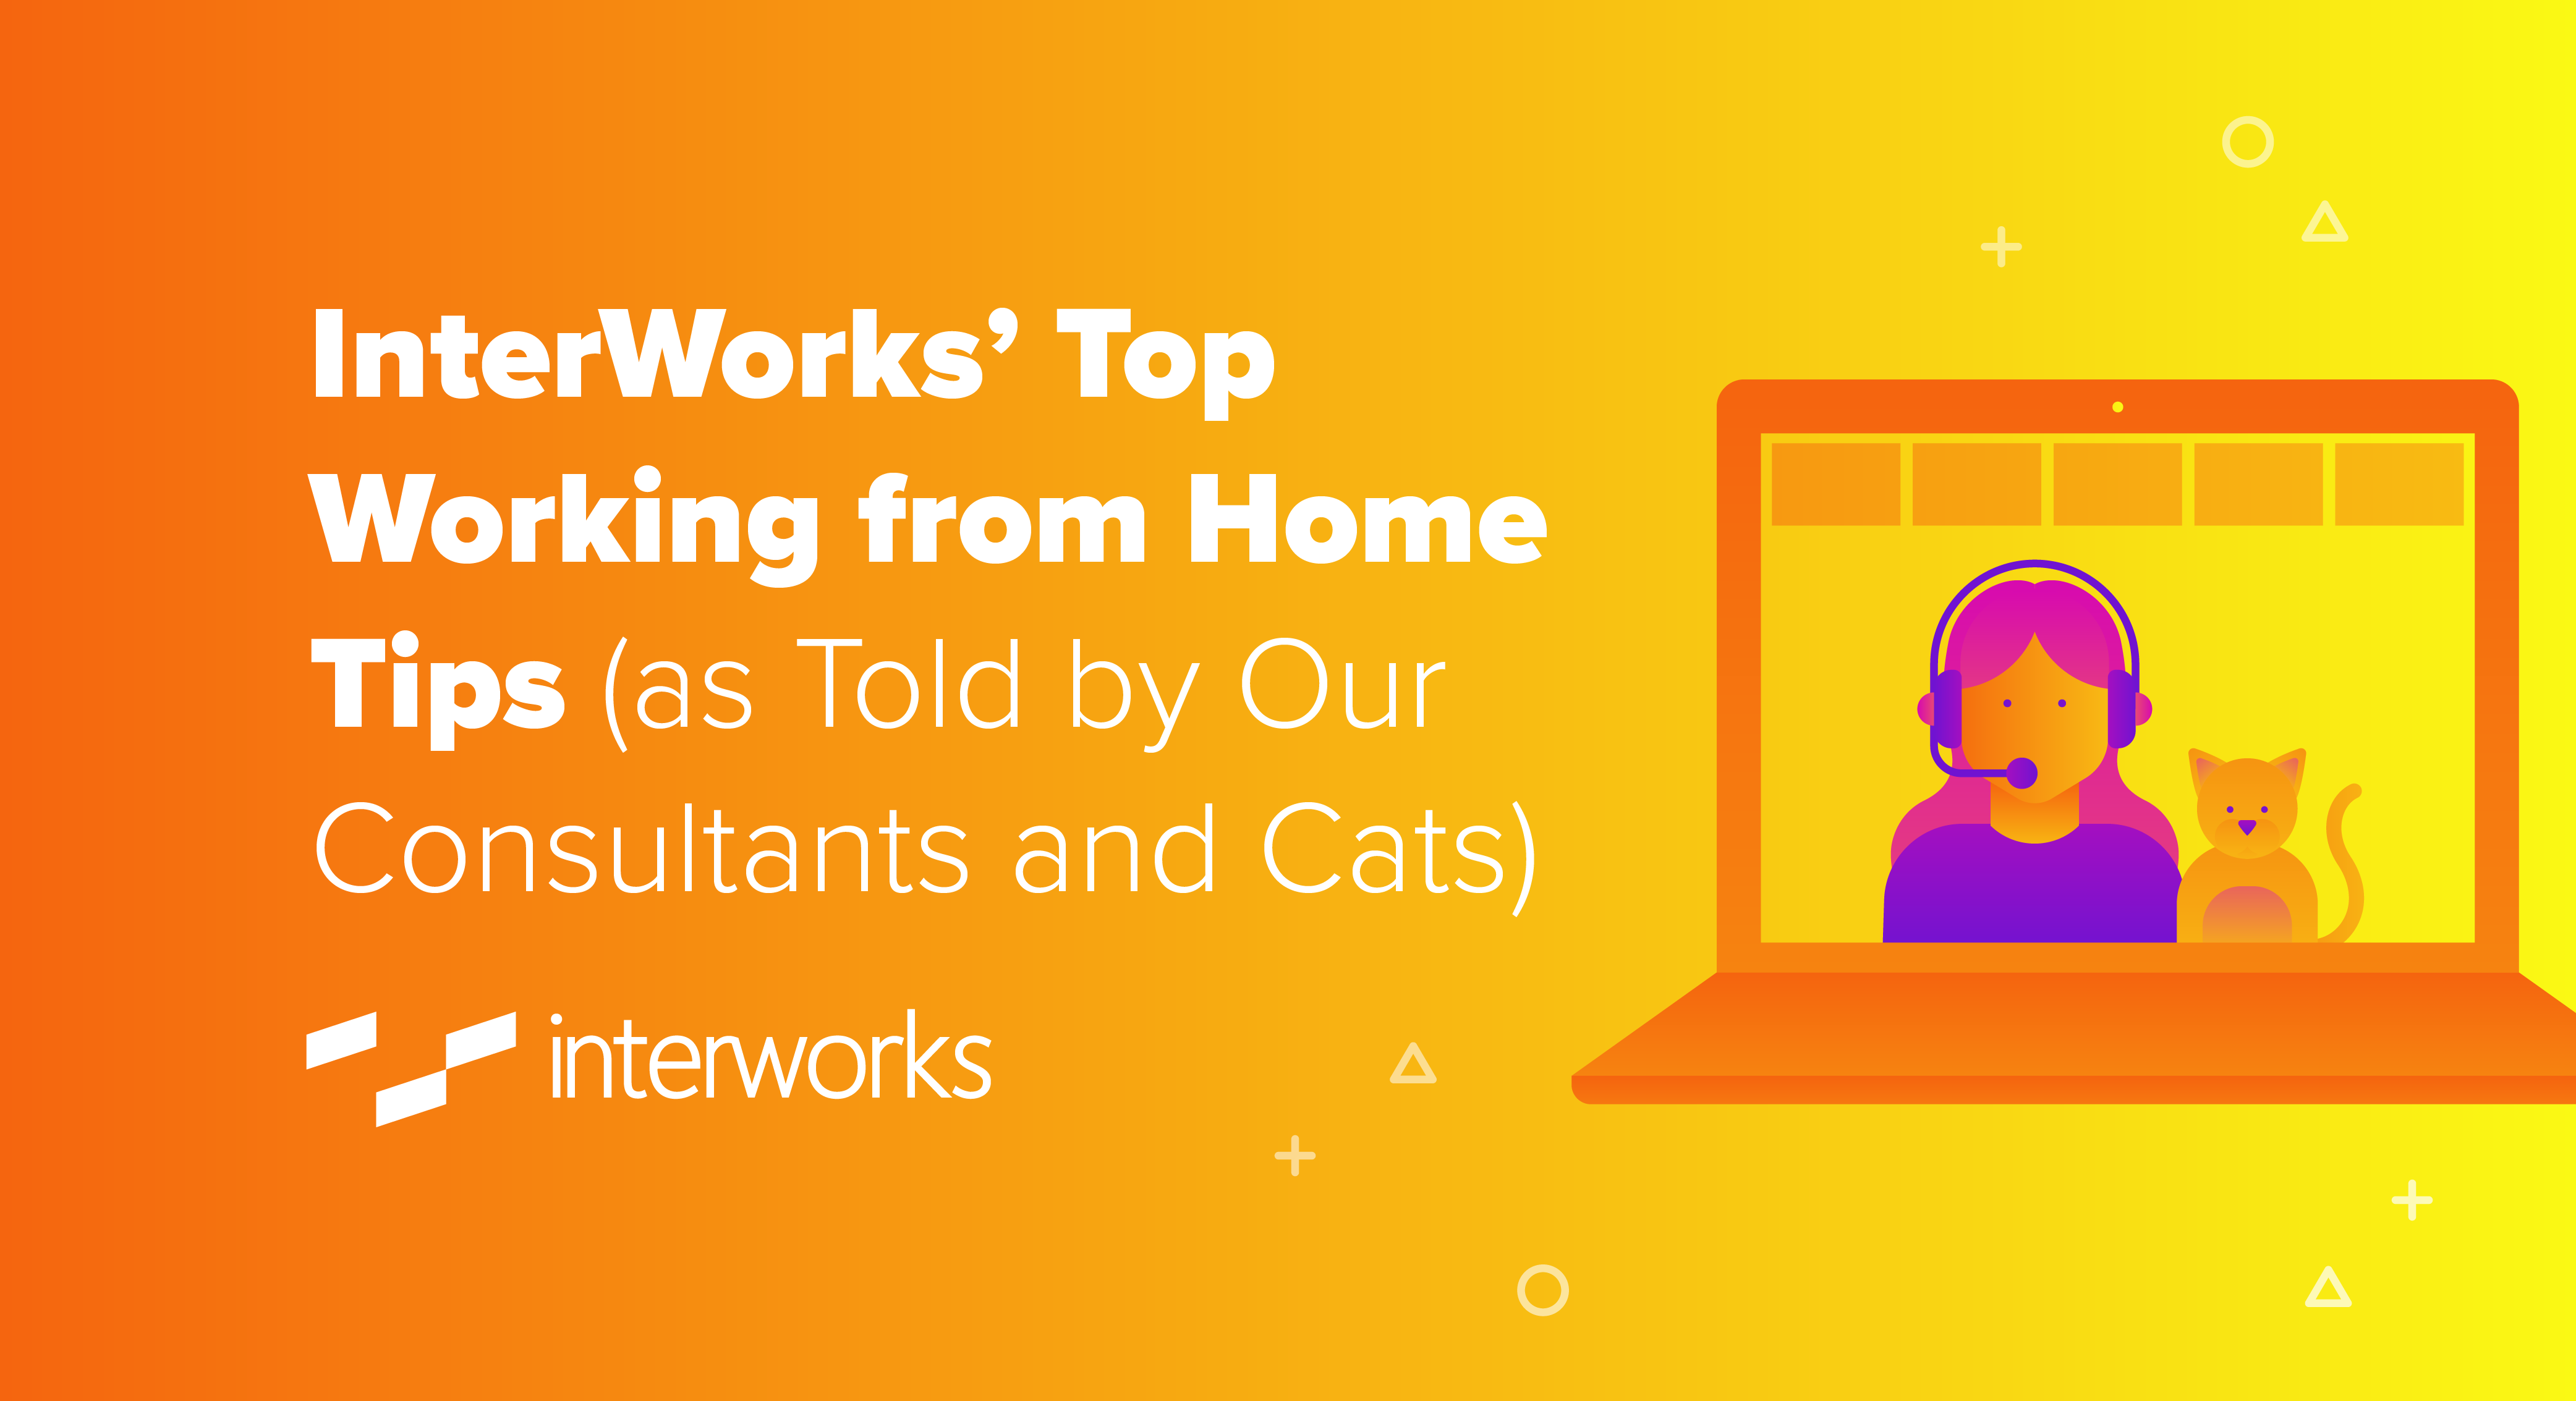 InterWorks' Top Working from Home Tips (as Told by Our Consultants and Cats)